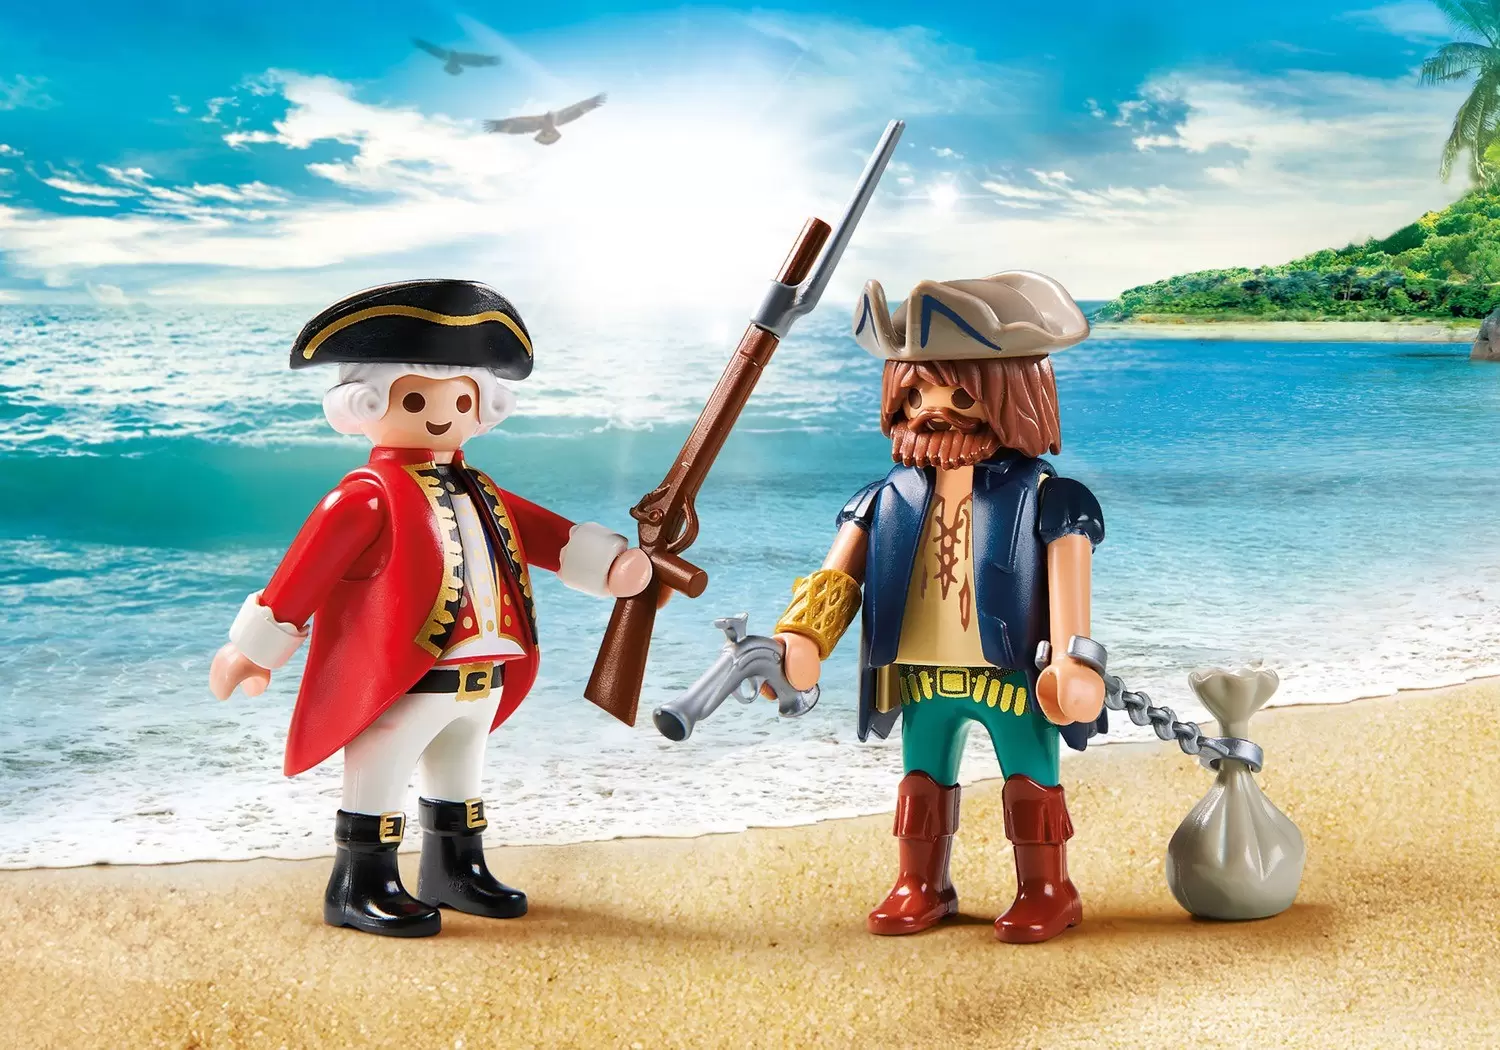 Pirate Playmobil - Pirate and Soldier